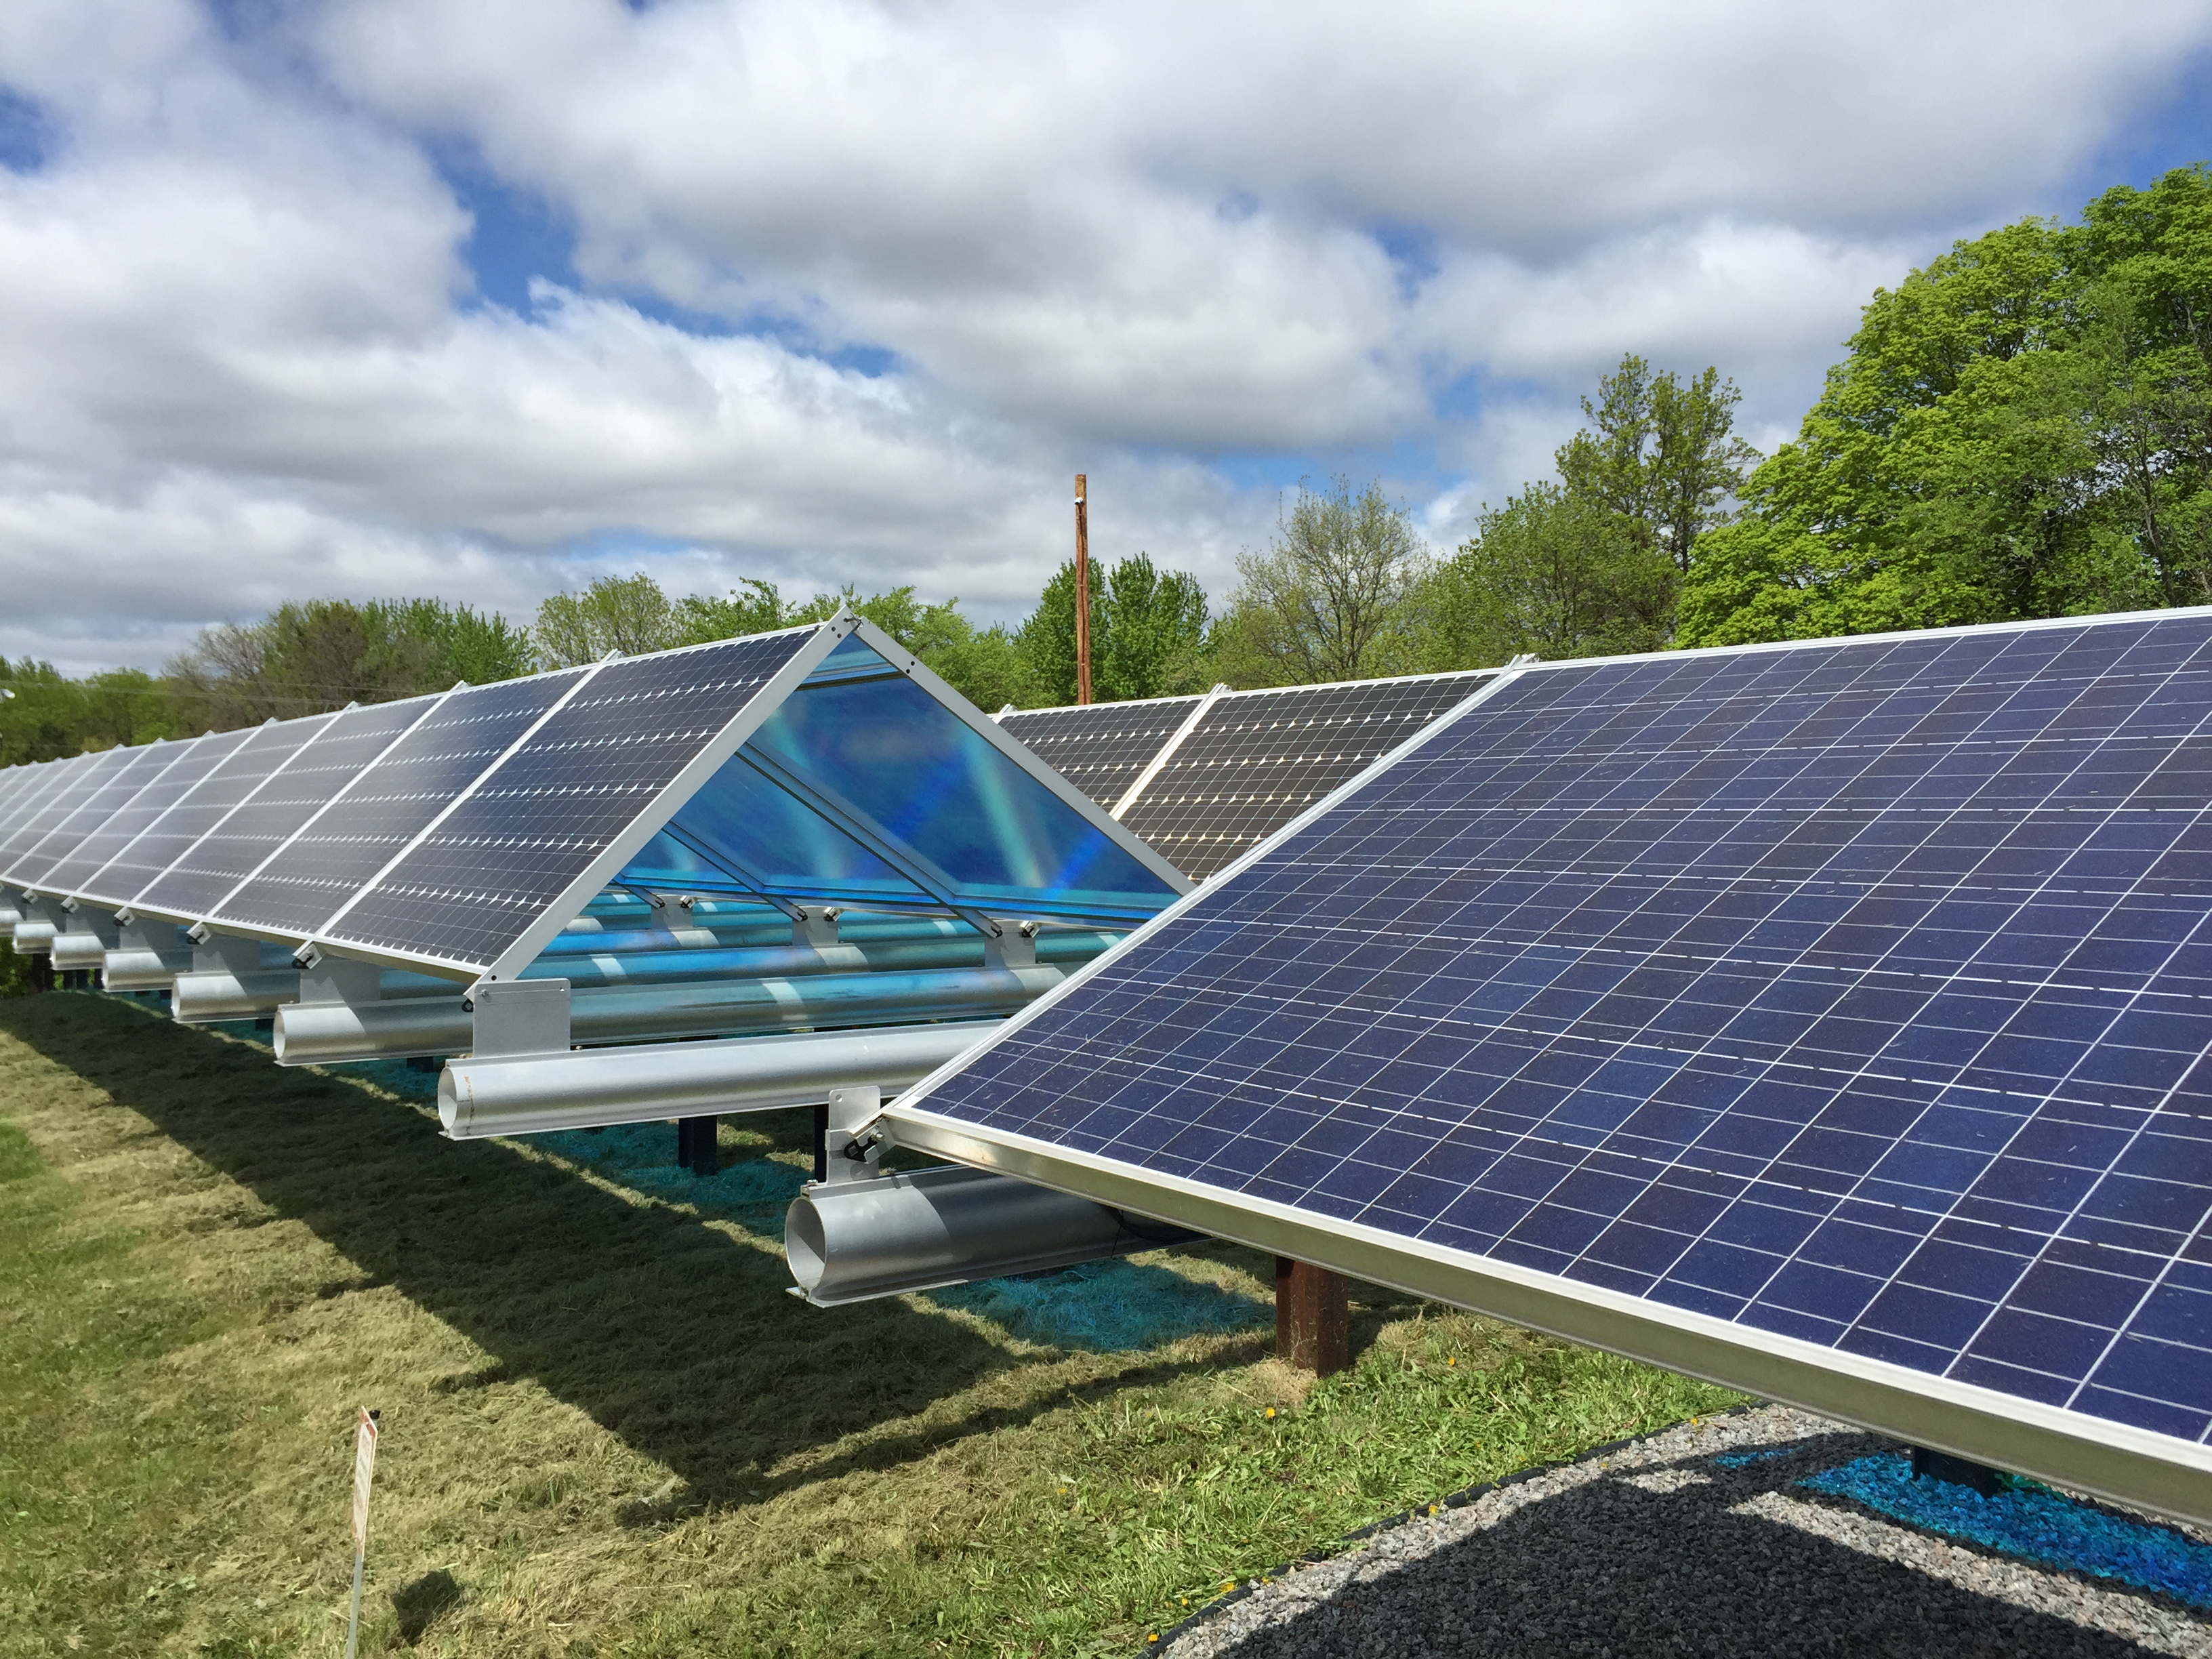 Minnesota’s Wright-Hennepin is among the nearly 200 electric co-ops offering community solar to members. (Photo By: Michael W. Kahn)